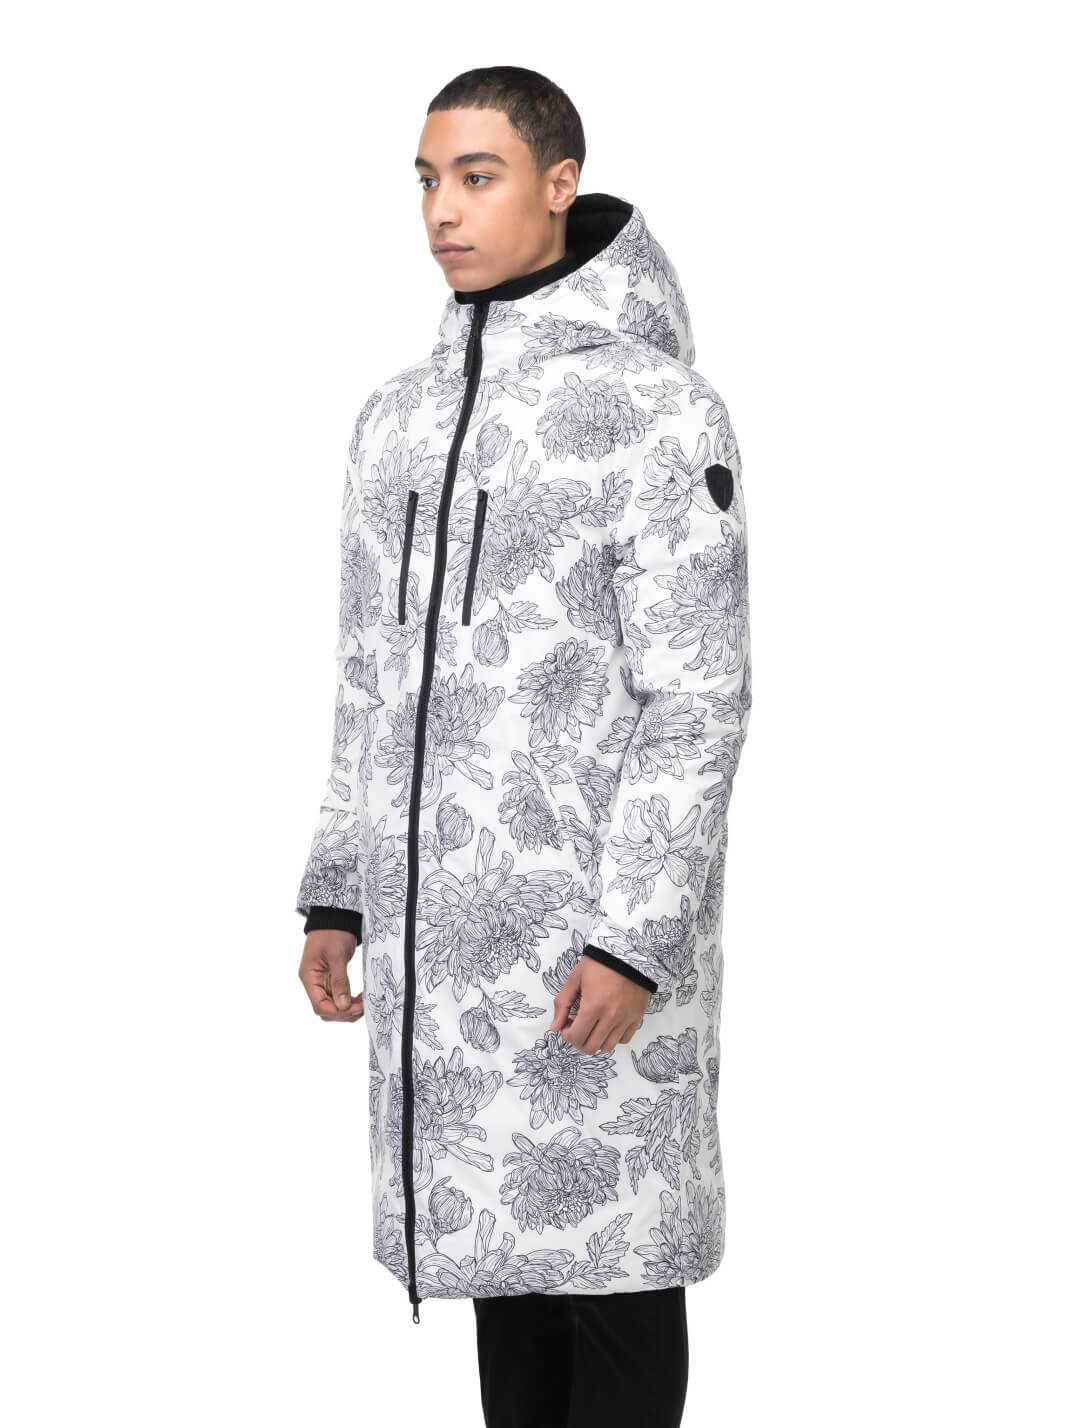 Men's knee length reversible down-filled parka with non-removable hood in White Floral Print